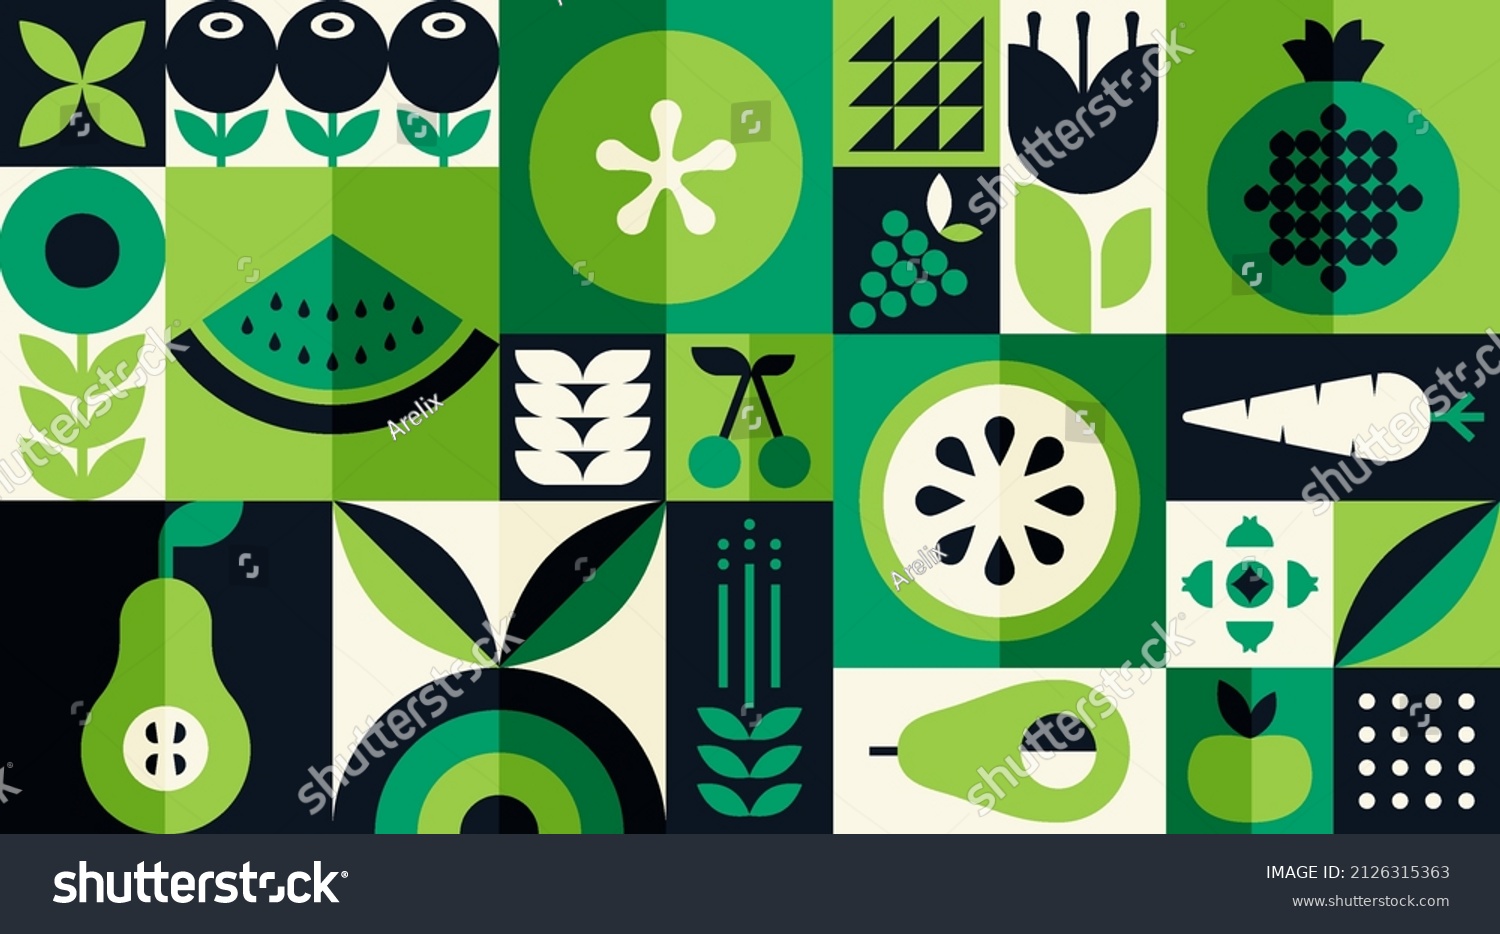 Organic fruit vegetable geometric pattern. Natural food background creative simple bauhaus style, agriculture vector design #2126315363